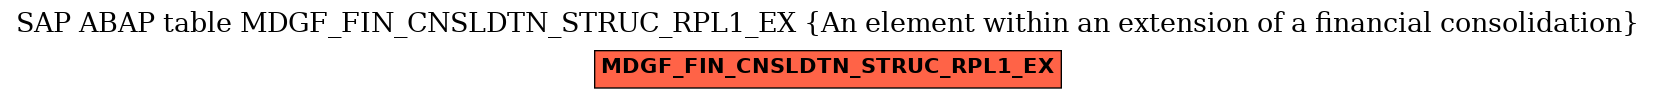 E-R Diagram for table MDGF_FIN_CNSLDTN_STRUC_RPL1_EX (An element within an extension of a financial consolidation)